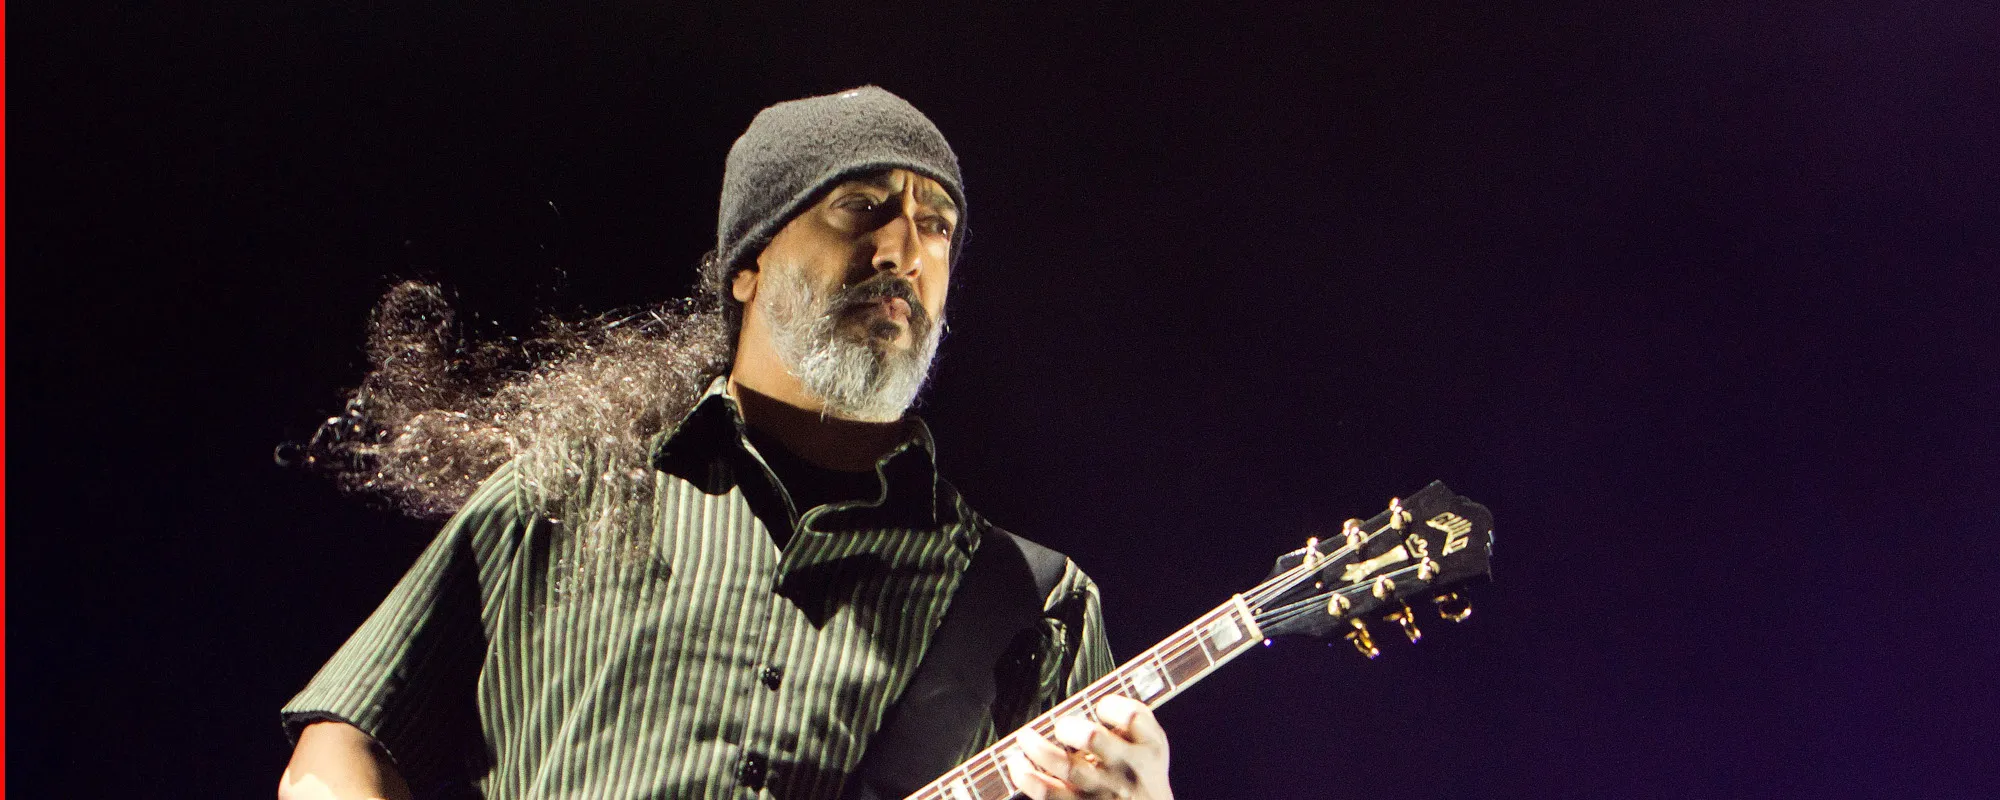 3 Songs You Didn’t Know Kim Thayil Wrote for Soundgarden